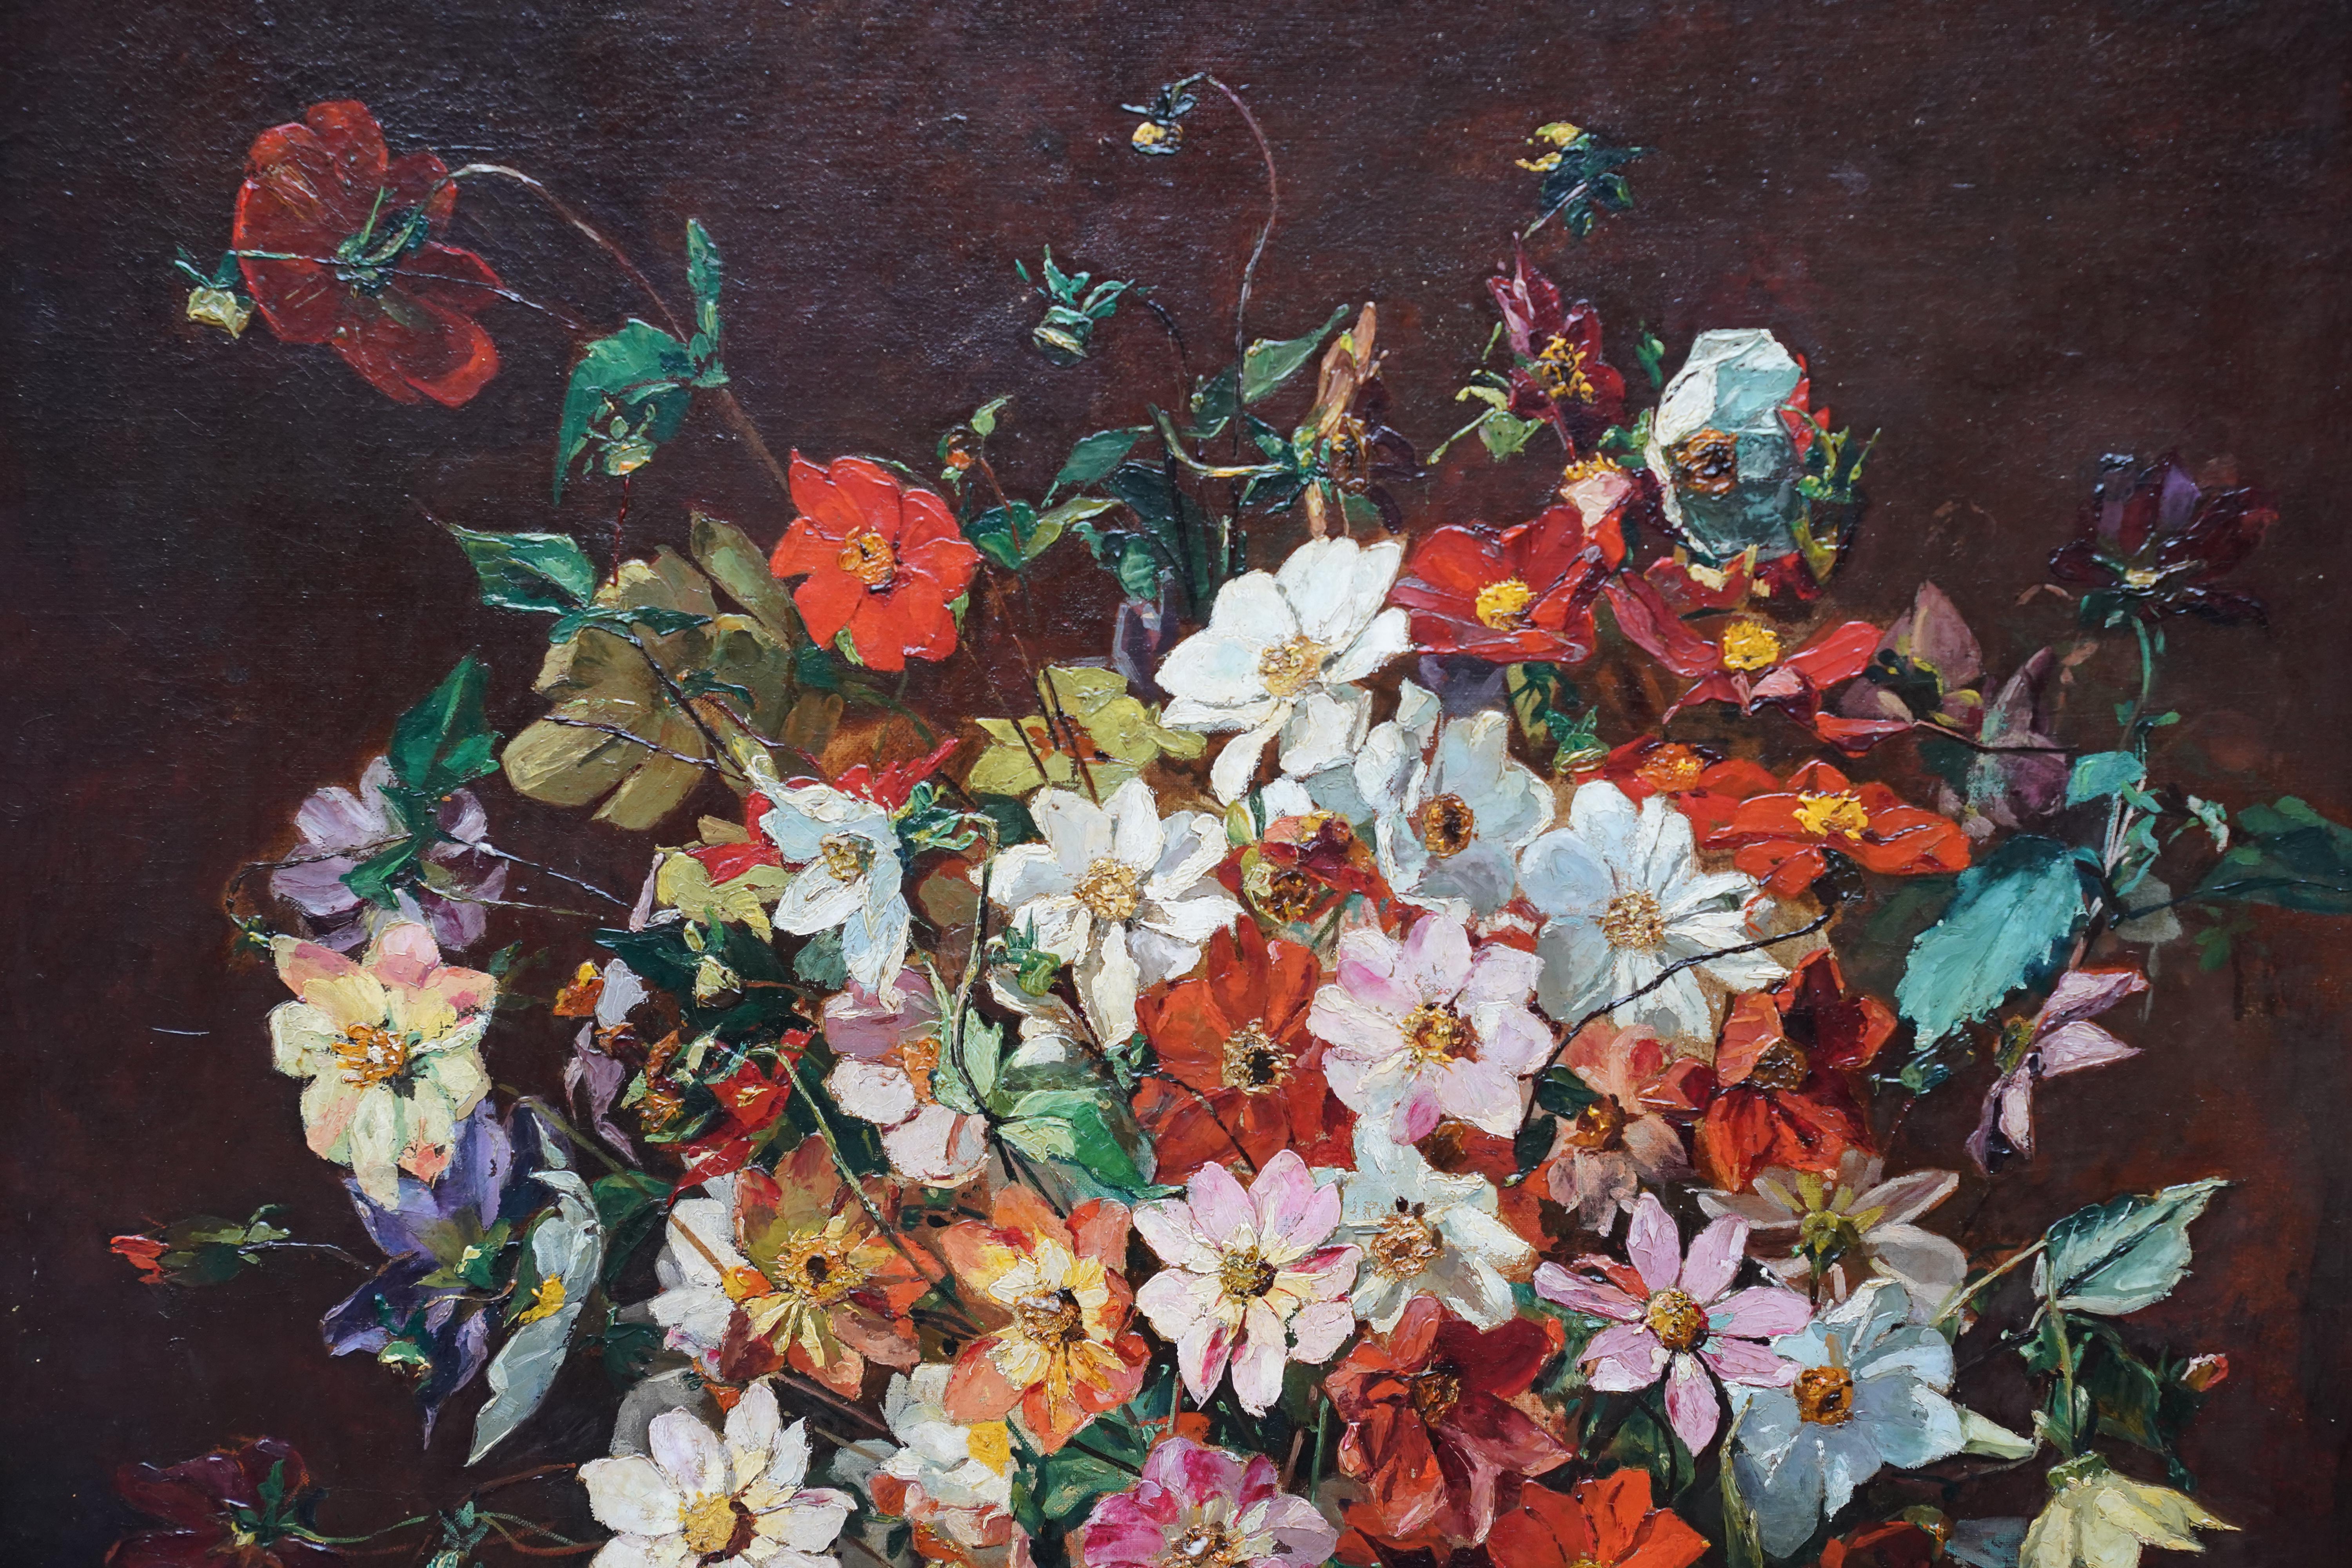 This wonderful exhibited British Victorian floral still life oil painting is by female artist and flower painter Mary Rischgitz. Painted in 1886 it was exhibited at the Royal Academy in 1887. It is a stunning opulent bouquet of delicate single